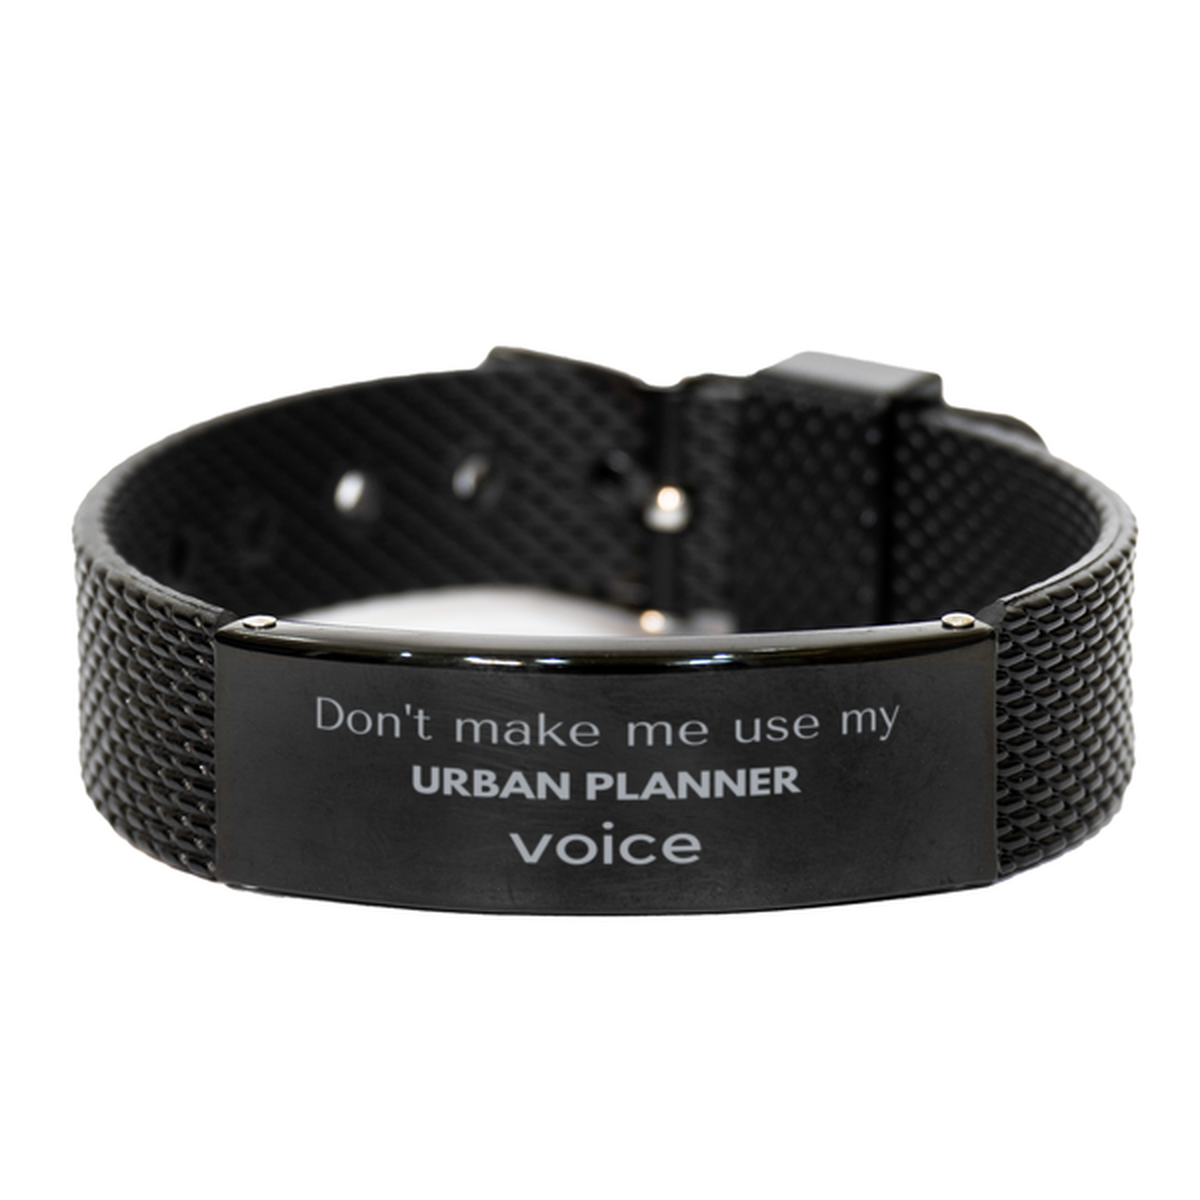 Don't make me use my Urban Planner voice, Sarcasm Urban Planner Gifts, Christmas Urban Planner Black Shark Mesh Bracelet Birthday Unique Gifts For Urban Planner Coworkers, Men, Women, Colleague, Friends